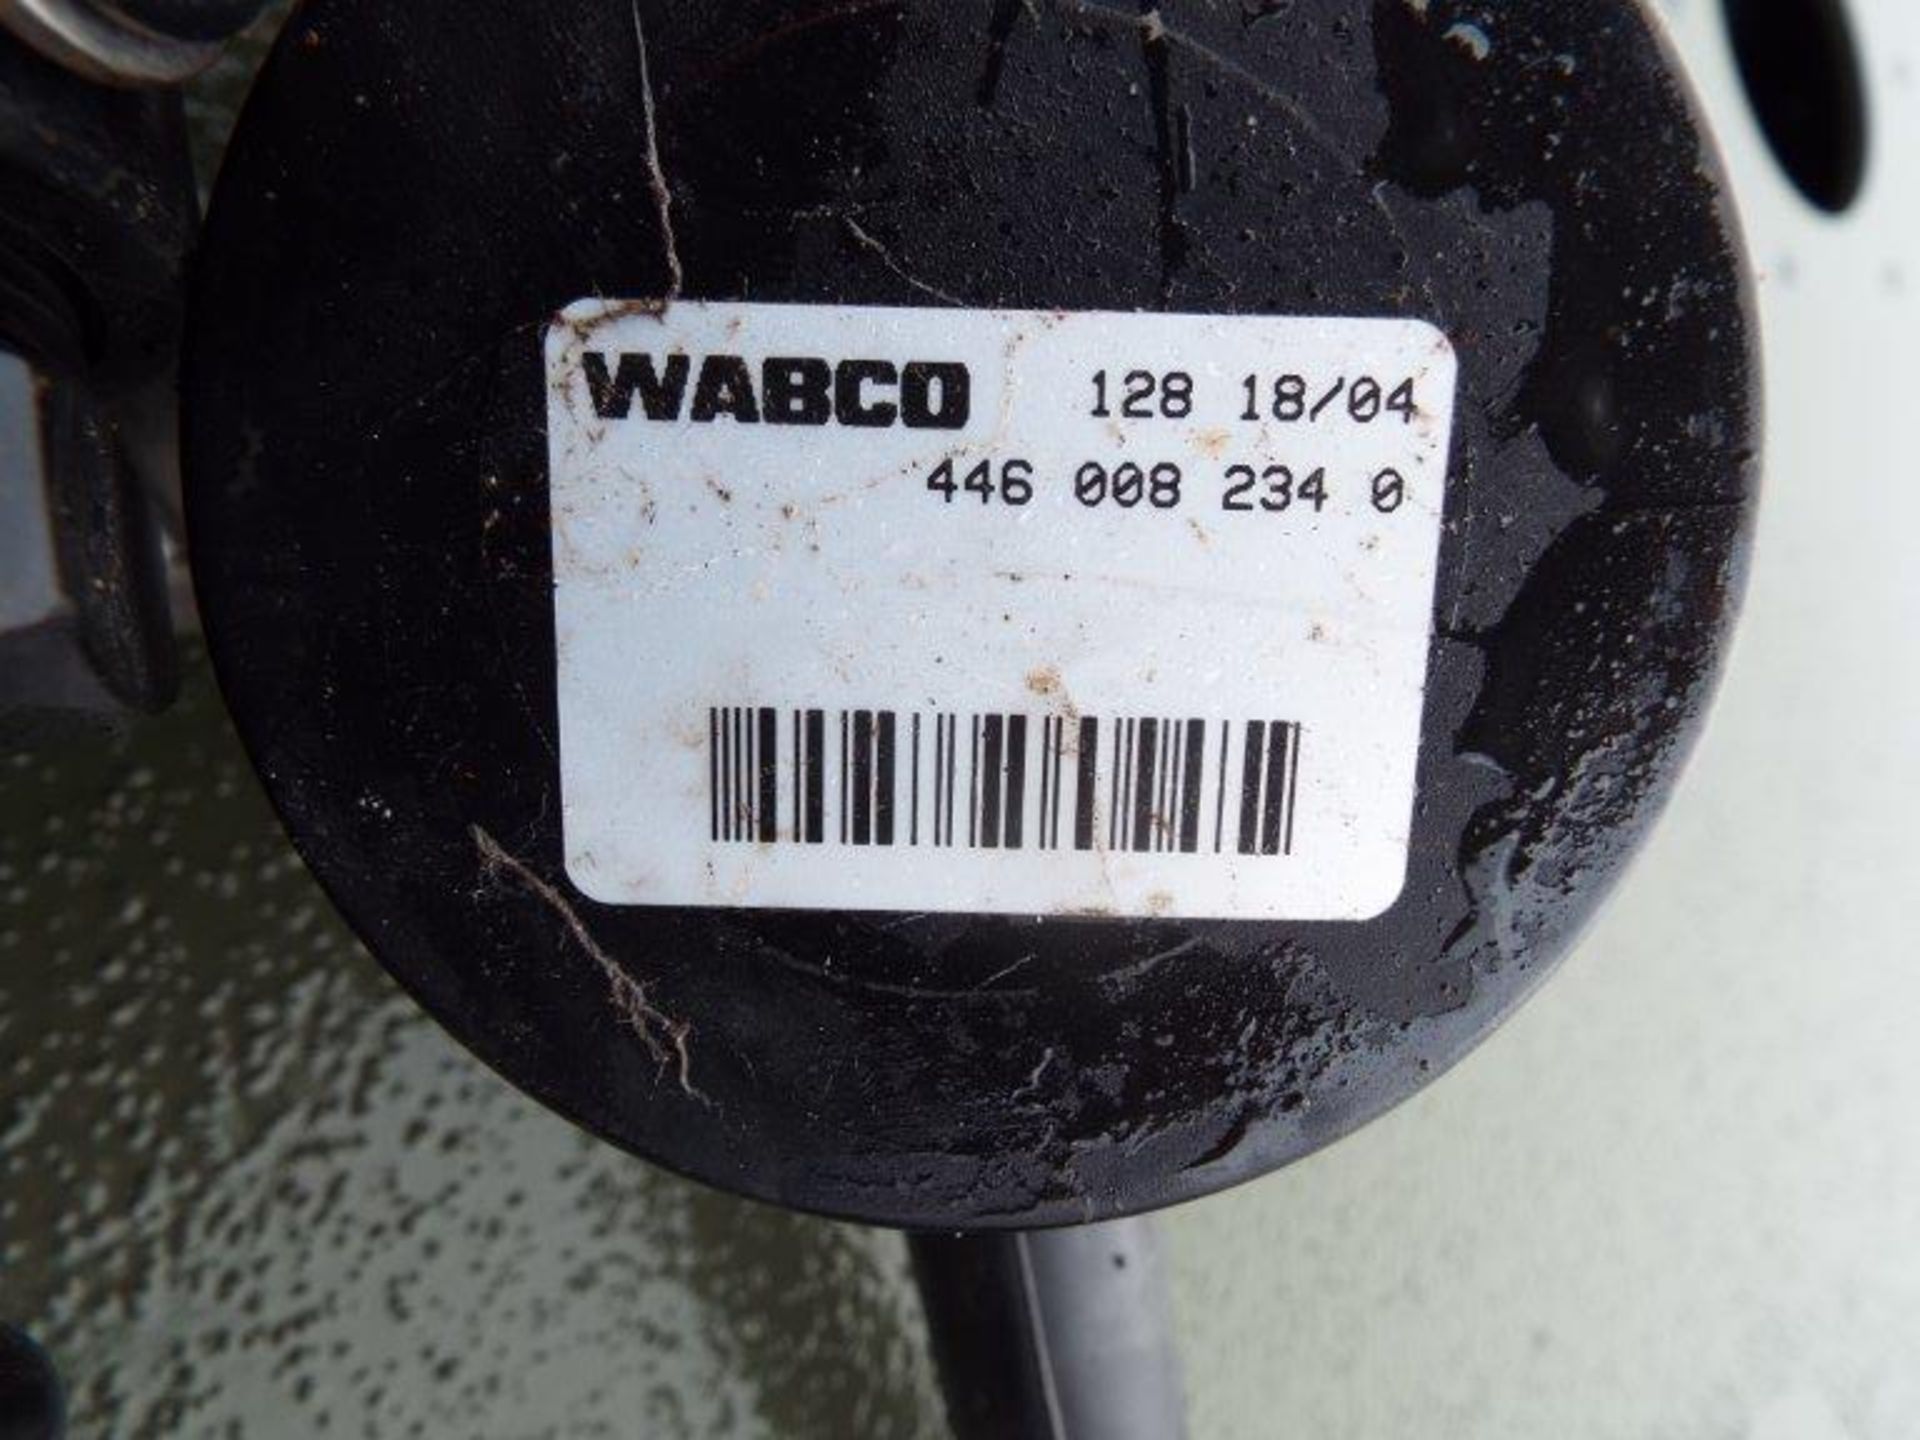 22 x Wabco 446 008 234 0 ABS Trailer Connection Cables - Image 4 of 7